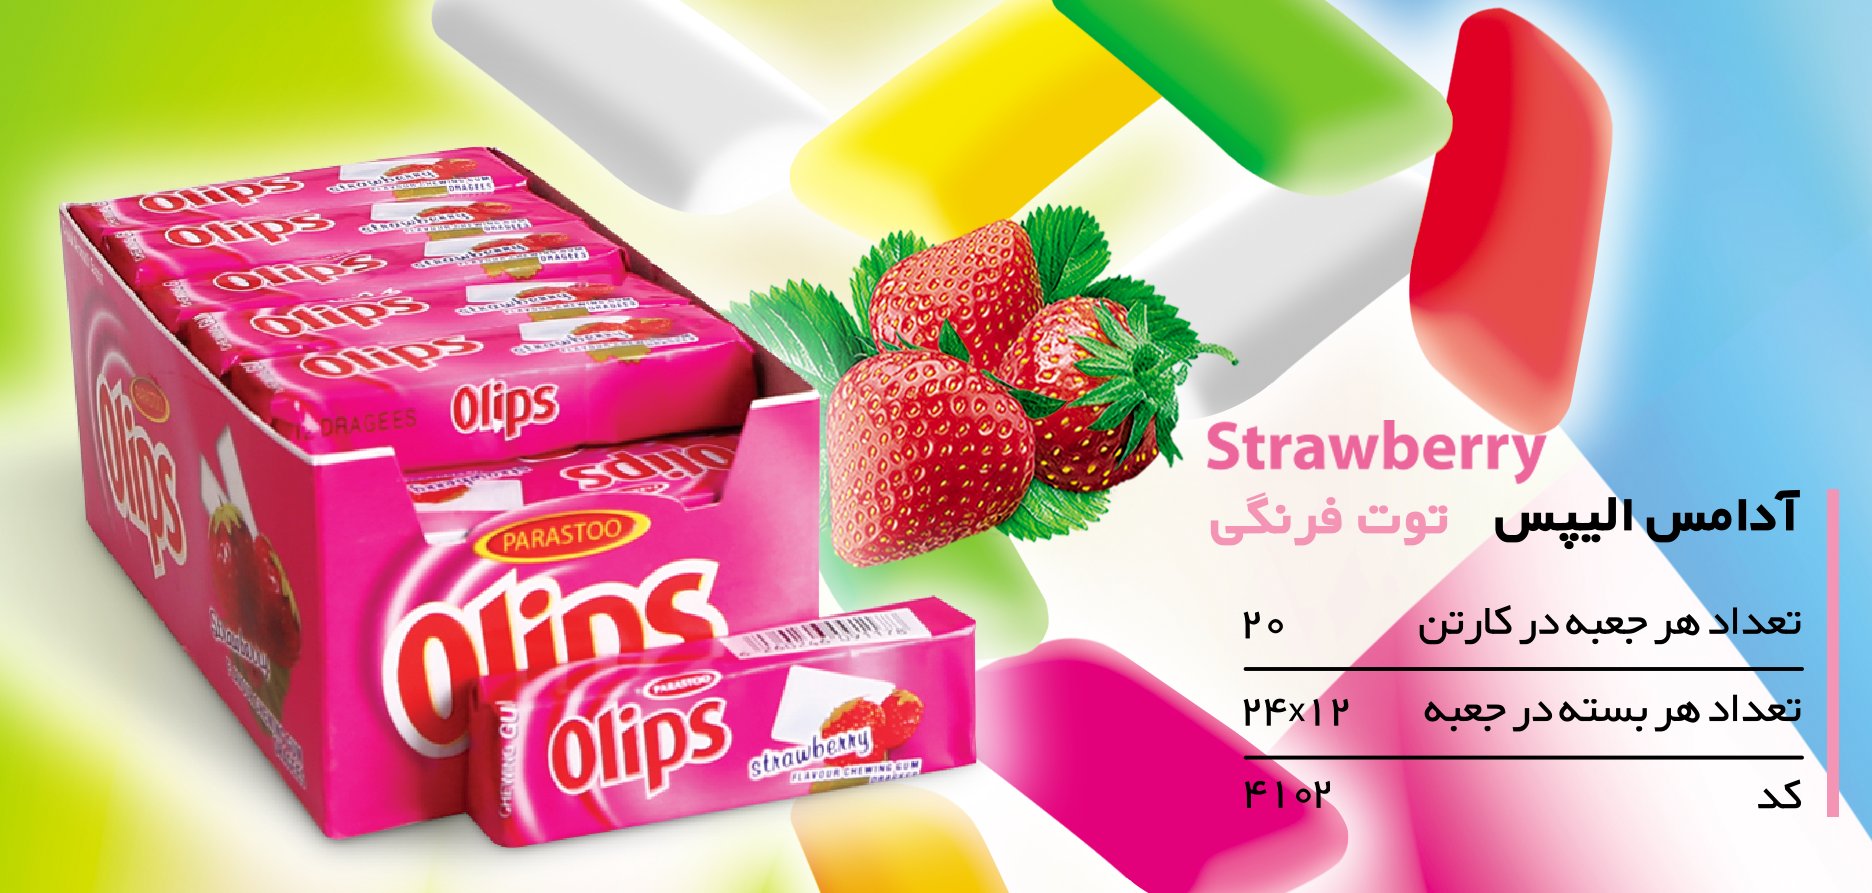 Chewing gum with strawberry flavor